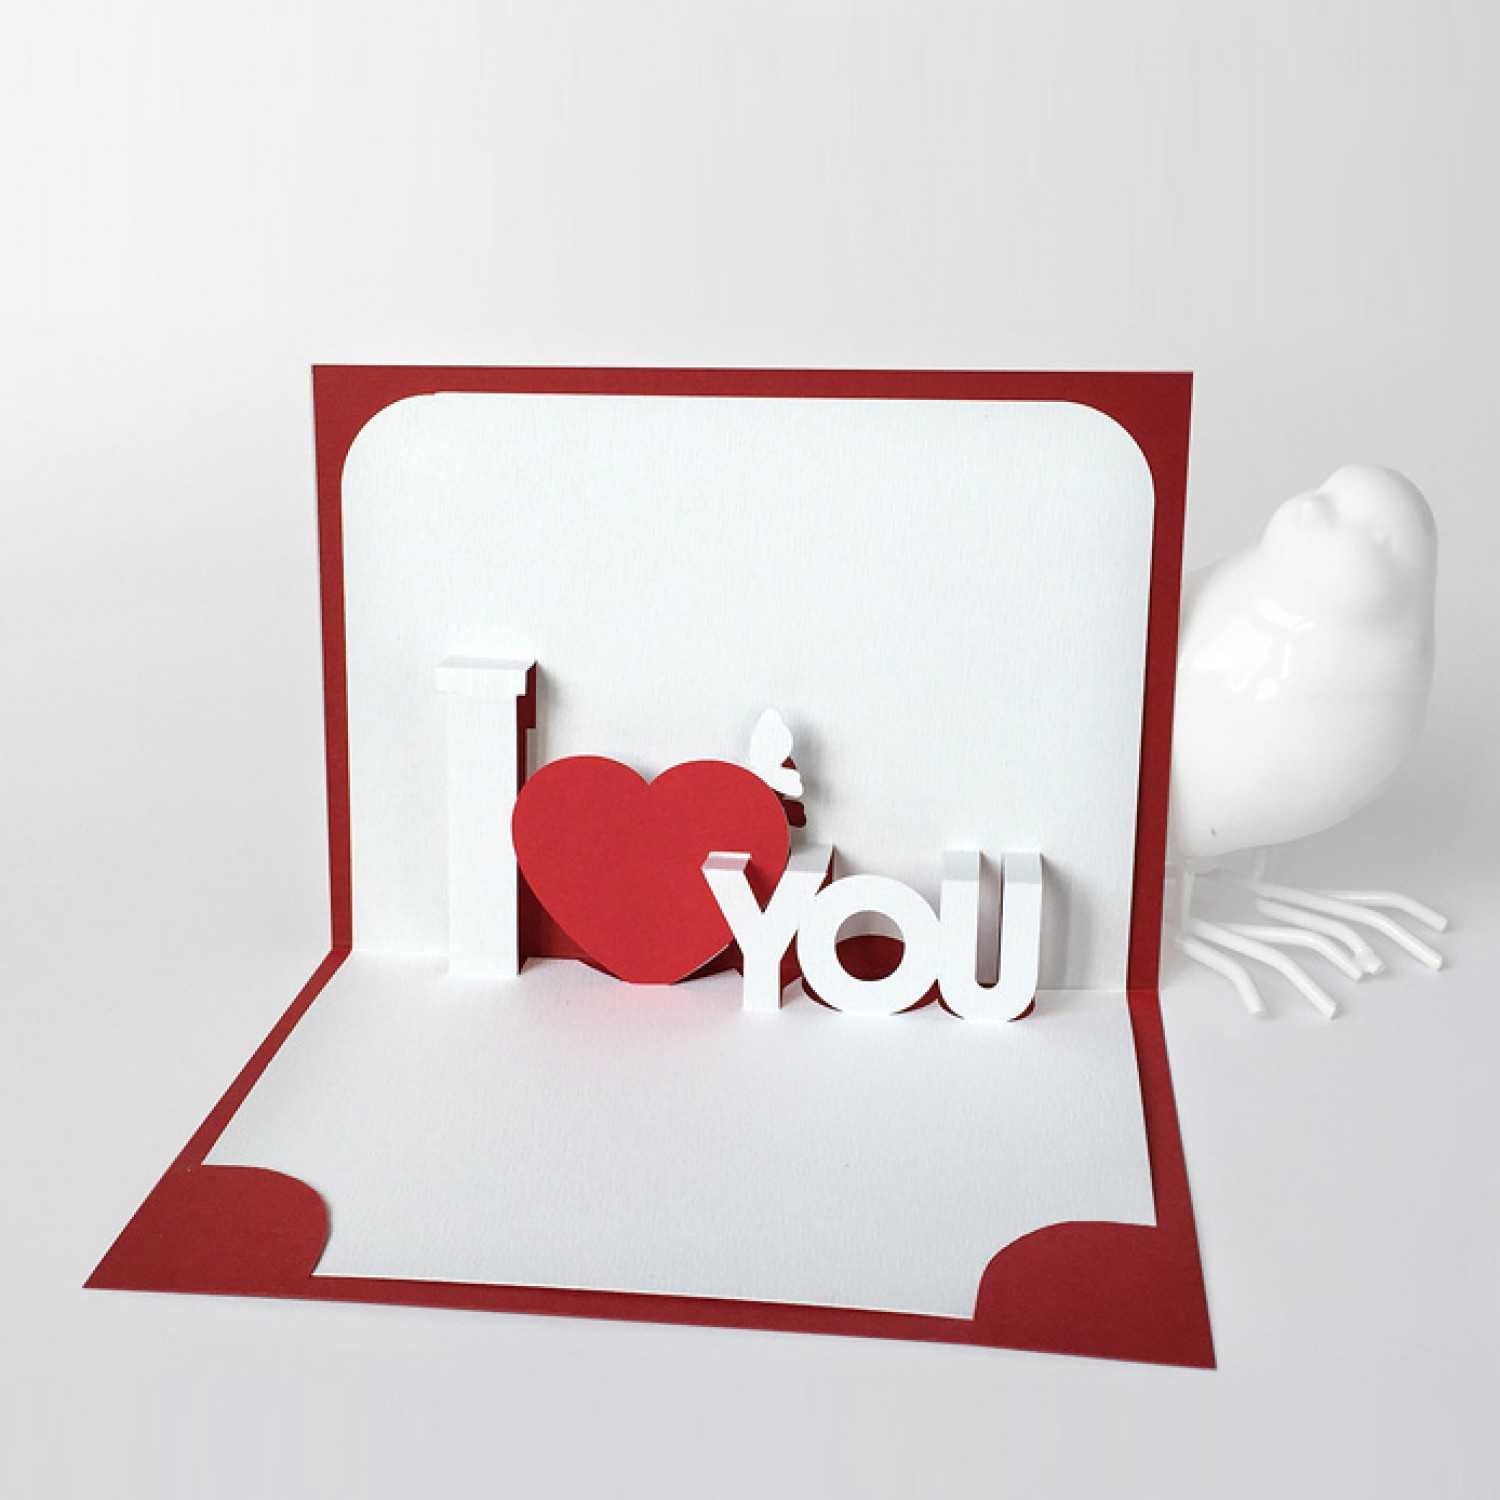 041 Template Ideas Pop Up Cards Templates Iloveu Shocking Intended For Wedding Pop Up Card Template Free